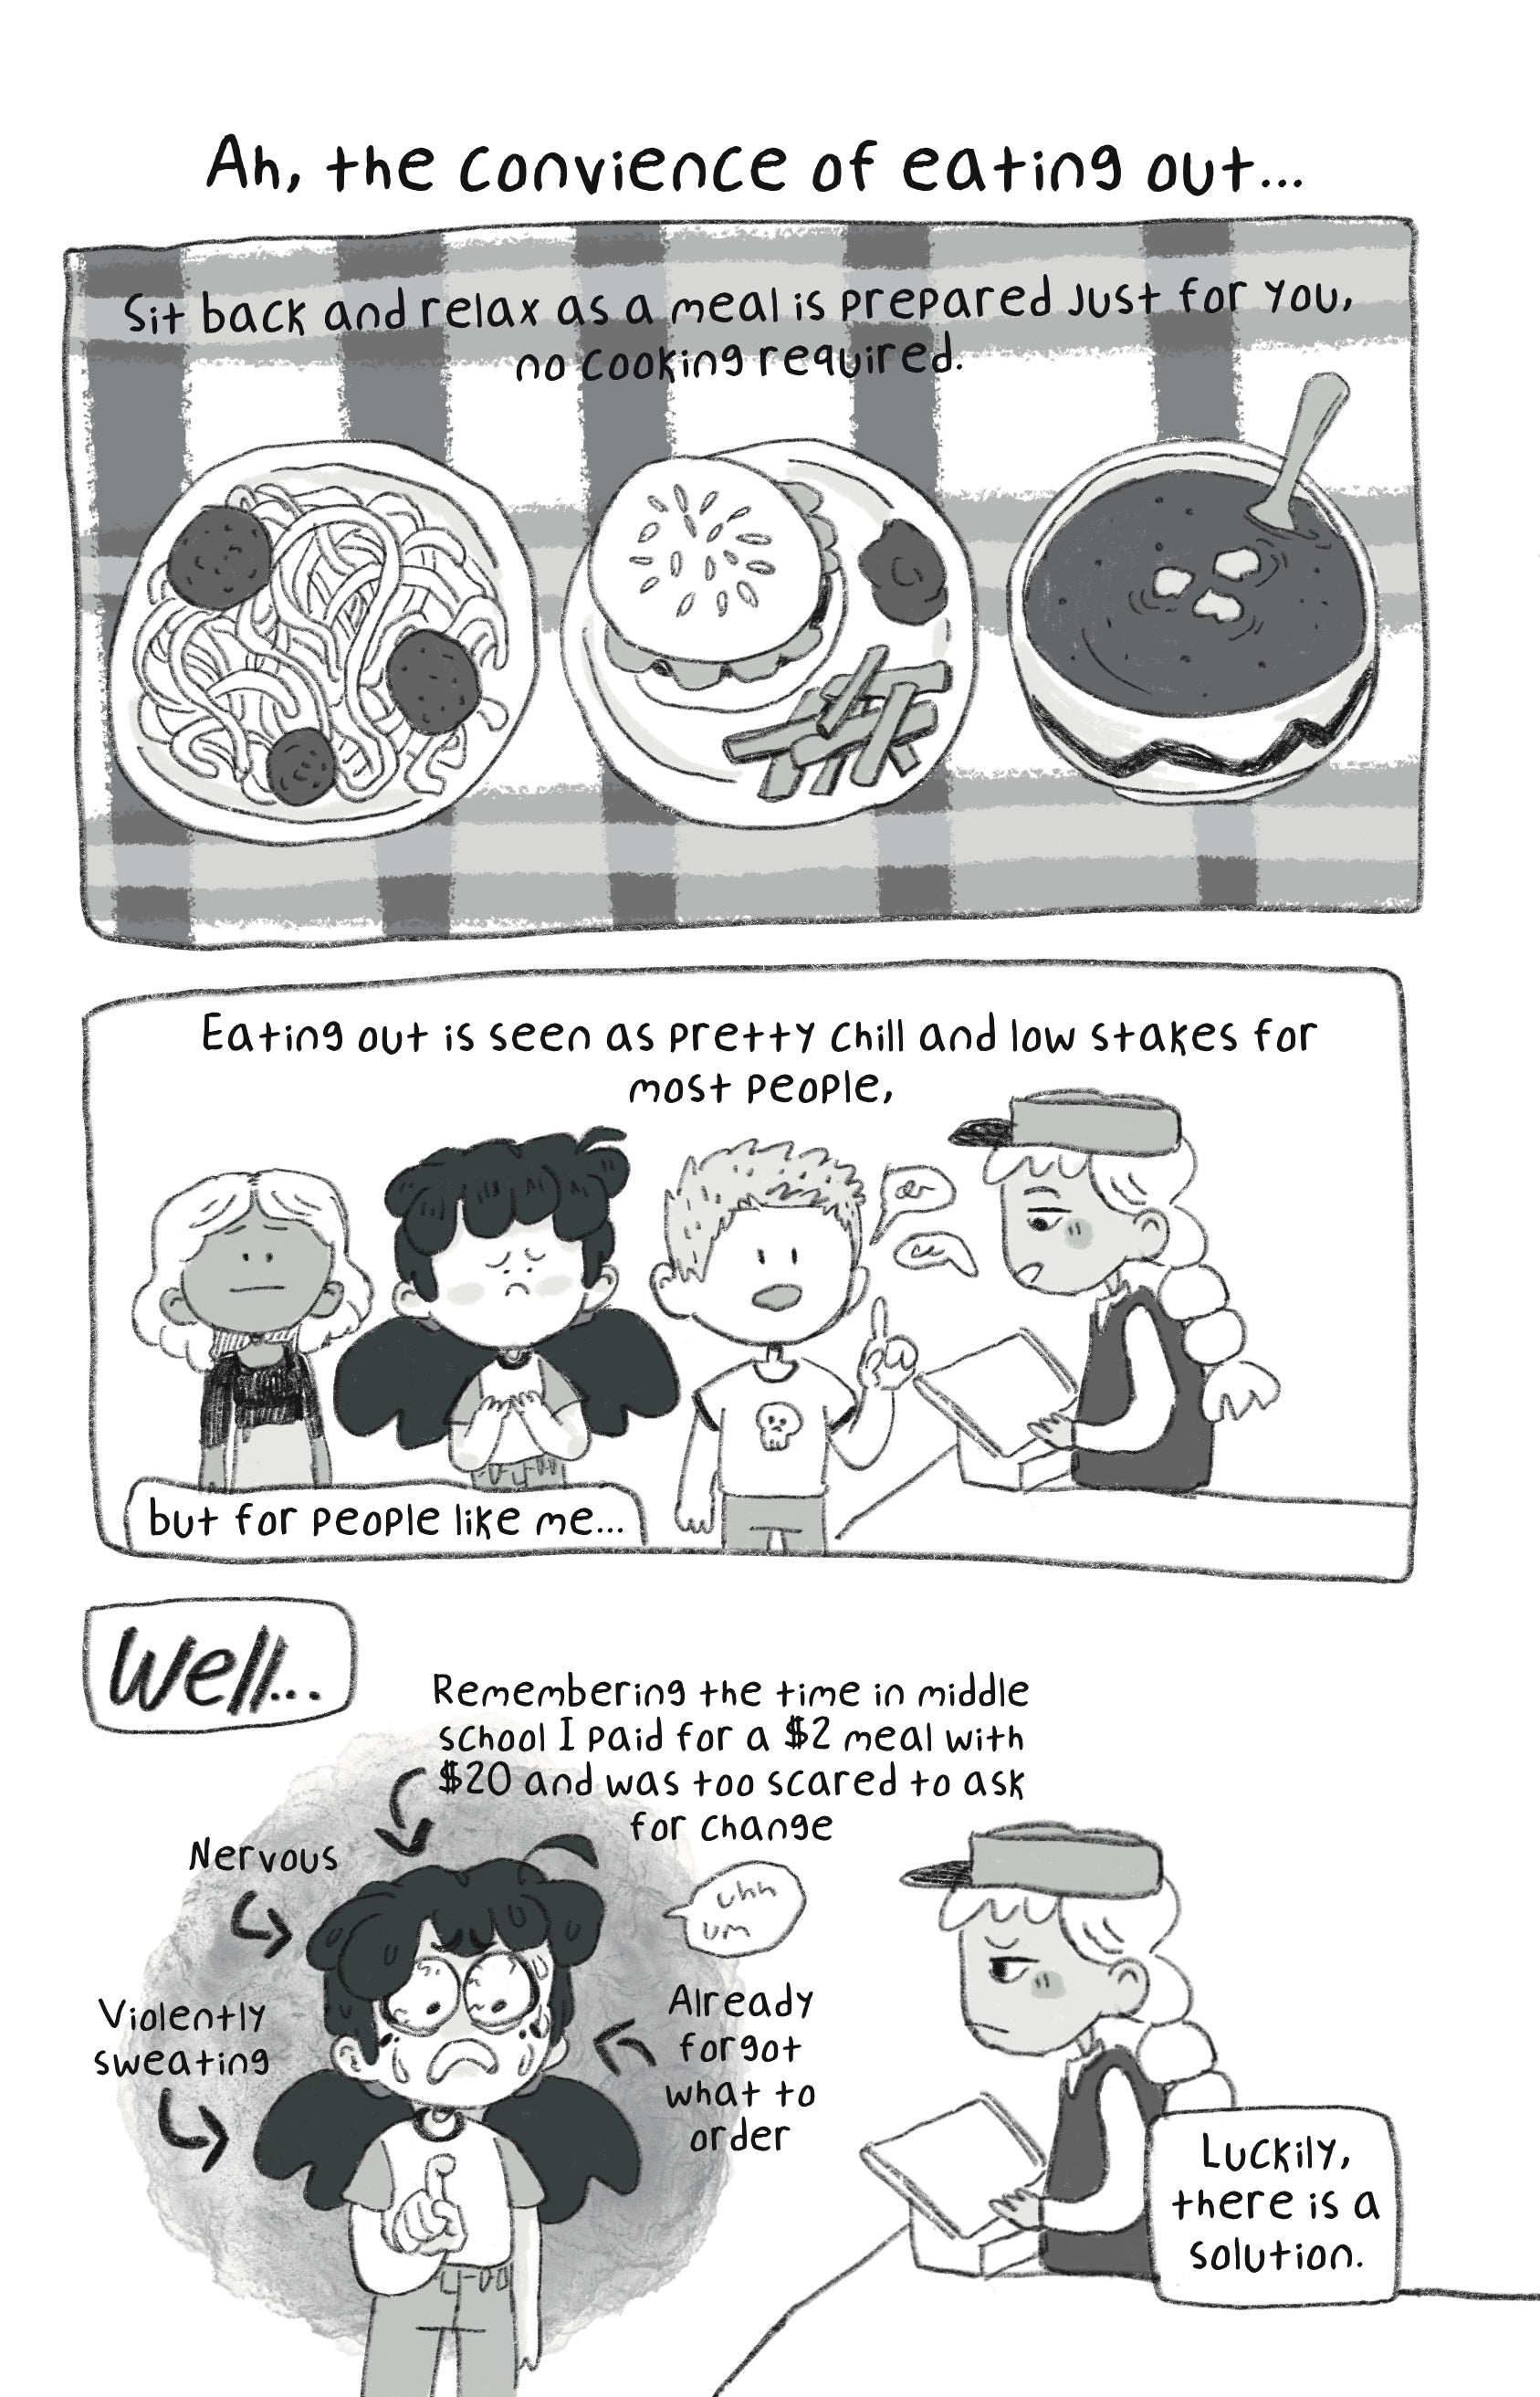 Zine: Eating Out With a Side of Anxiety